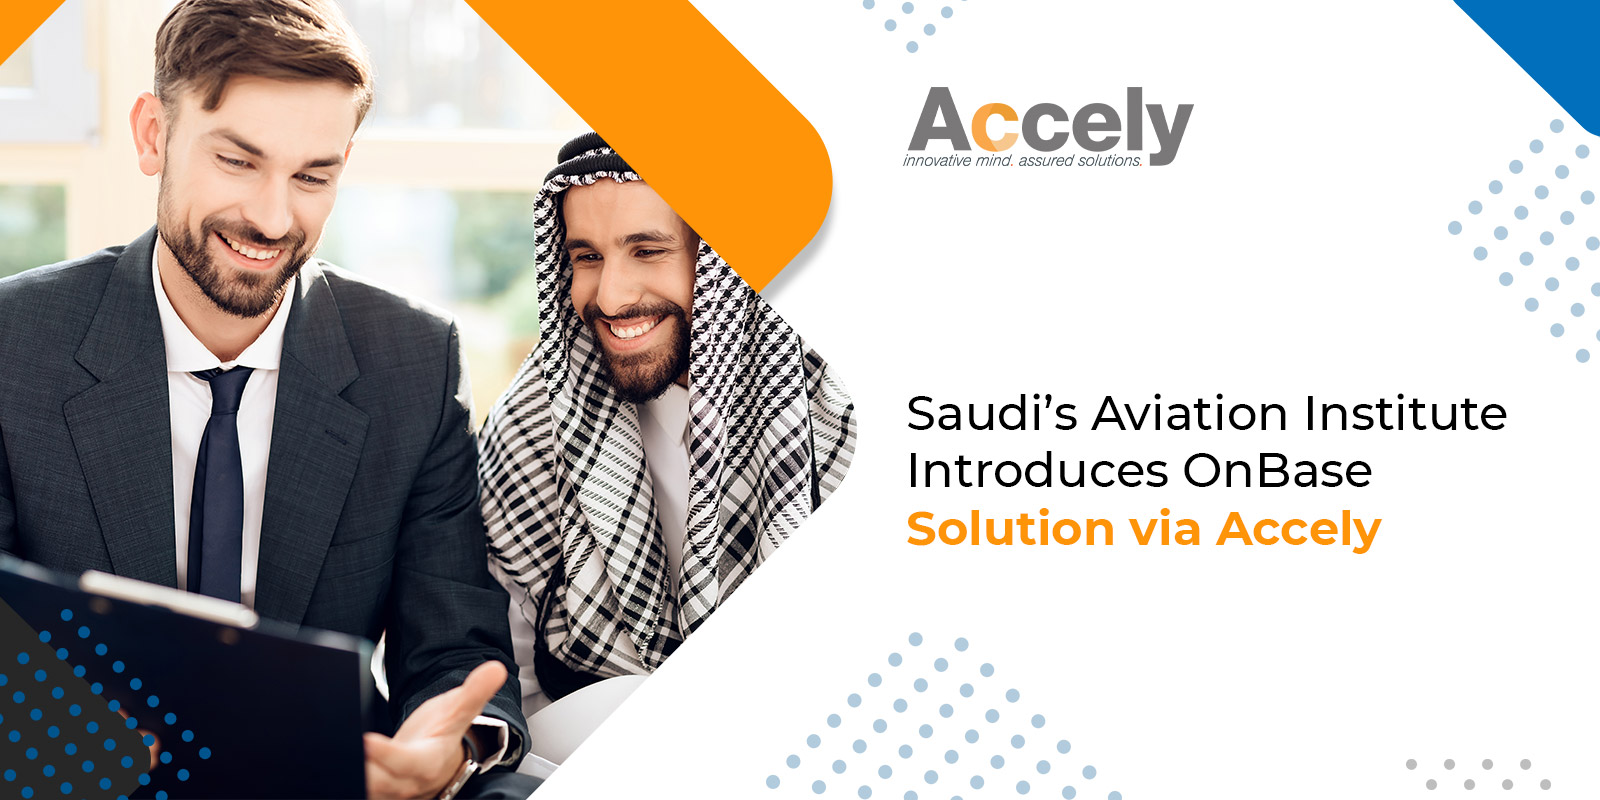 Saudi’s Aviation Institute Introduces OnBase Solution via Accely